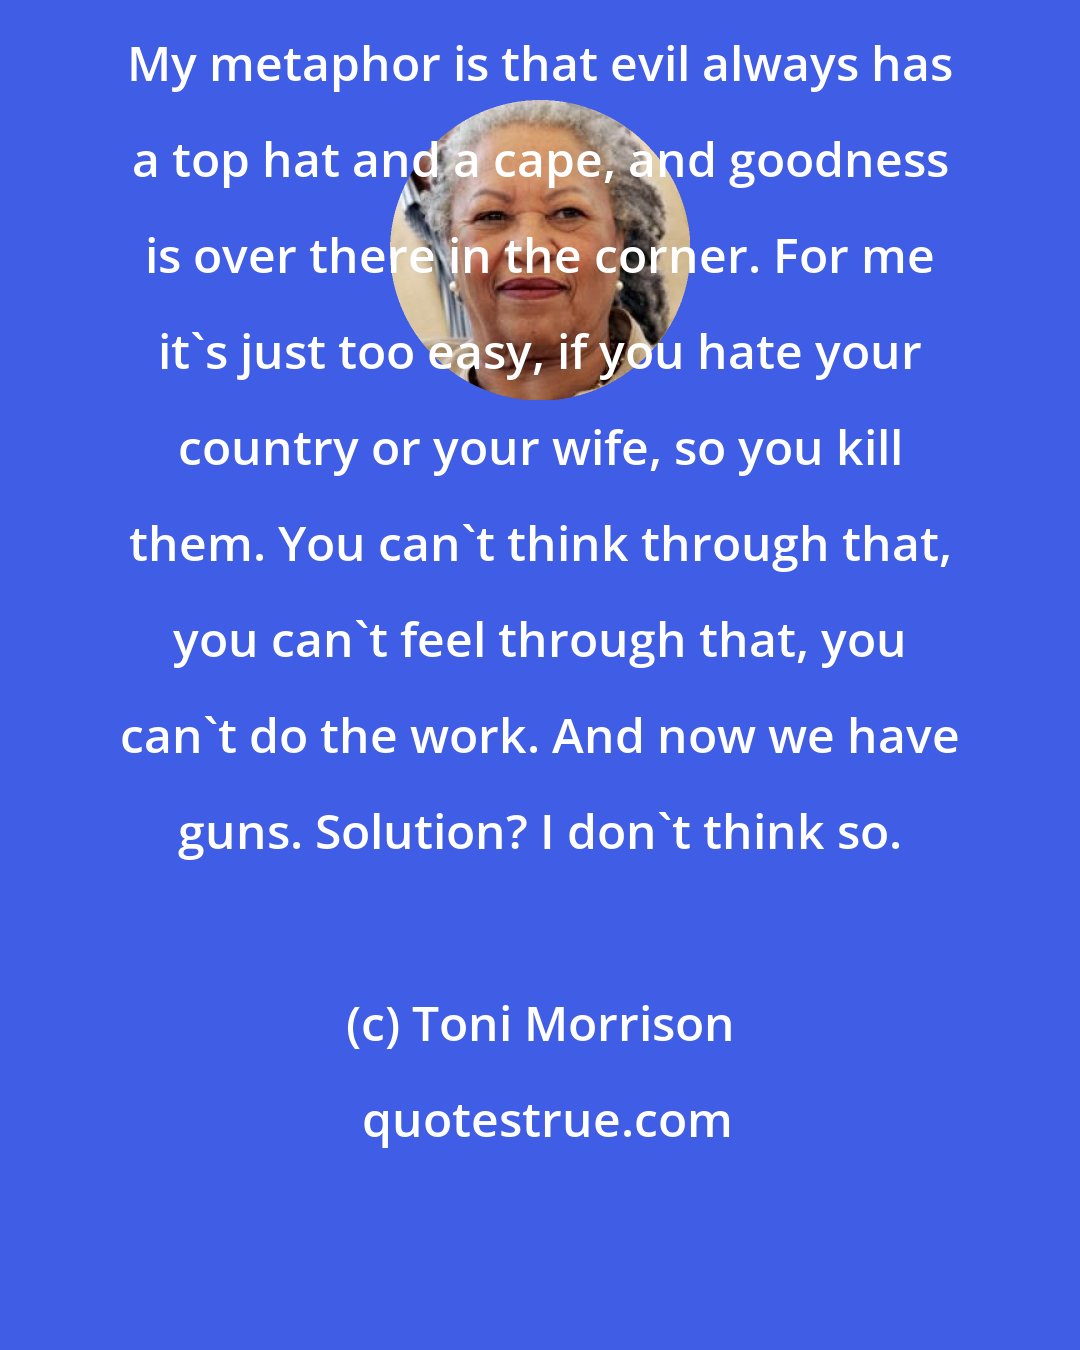 Toni Morrison: My metaphor is that evil always has a top hat and a cape, and goodness is over there in the corner. For me it's just too easy, if you hate your country or your wife, so you kill them. You can't think through that, you can't feel through that, you can't do the work. And now we have guns. Solution? I don't think so.